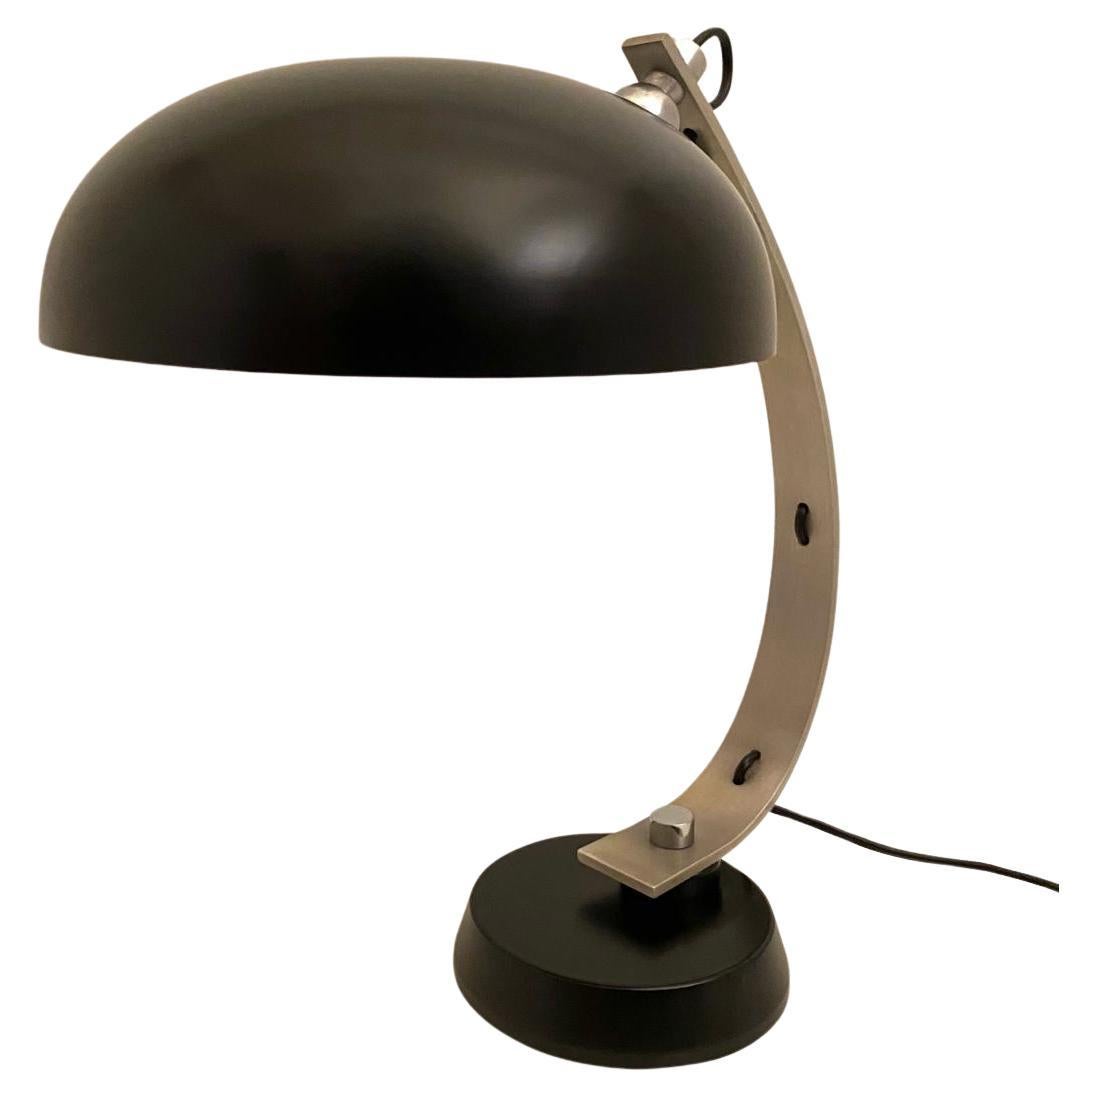 1970s vintage table lamp in industrial style. Designed by Angelo Lelli for Arredoluce in the 1970s. Double colour aluminium structure with flexible lampshade. The lamp has been recabled whilist its structure has been refined. In really good